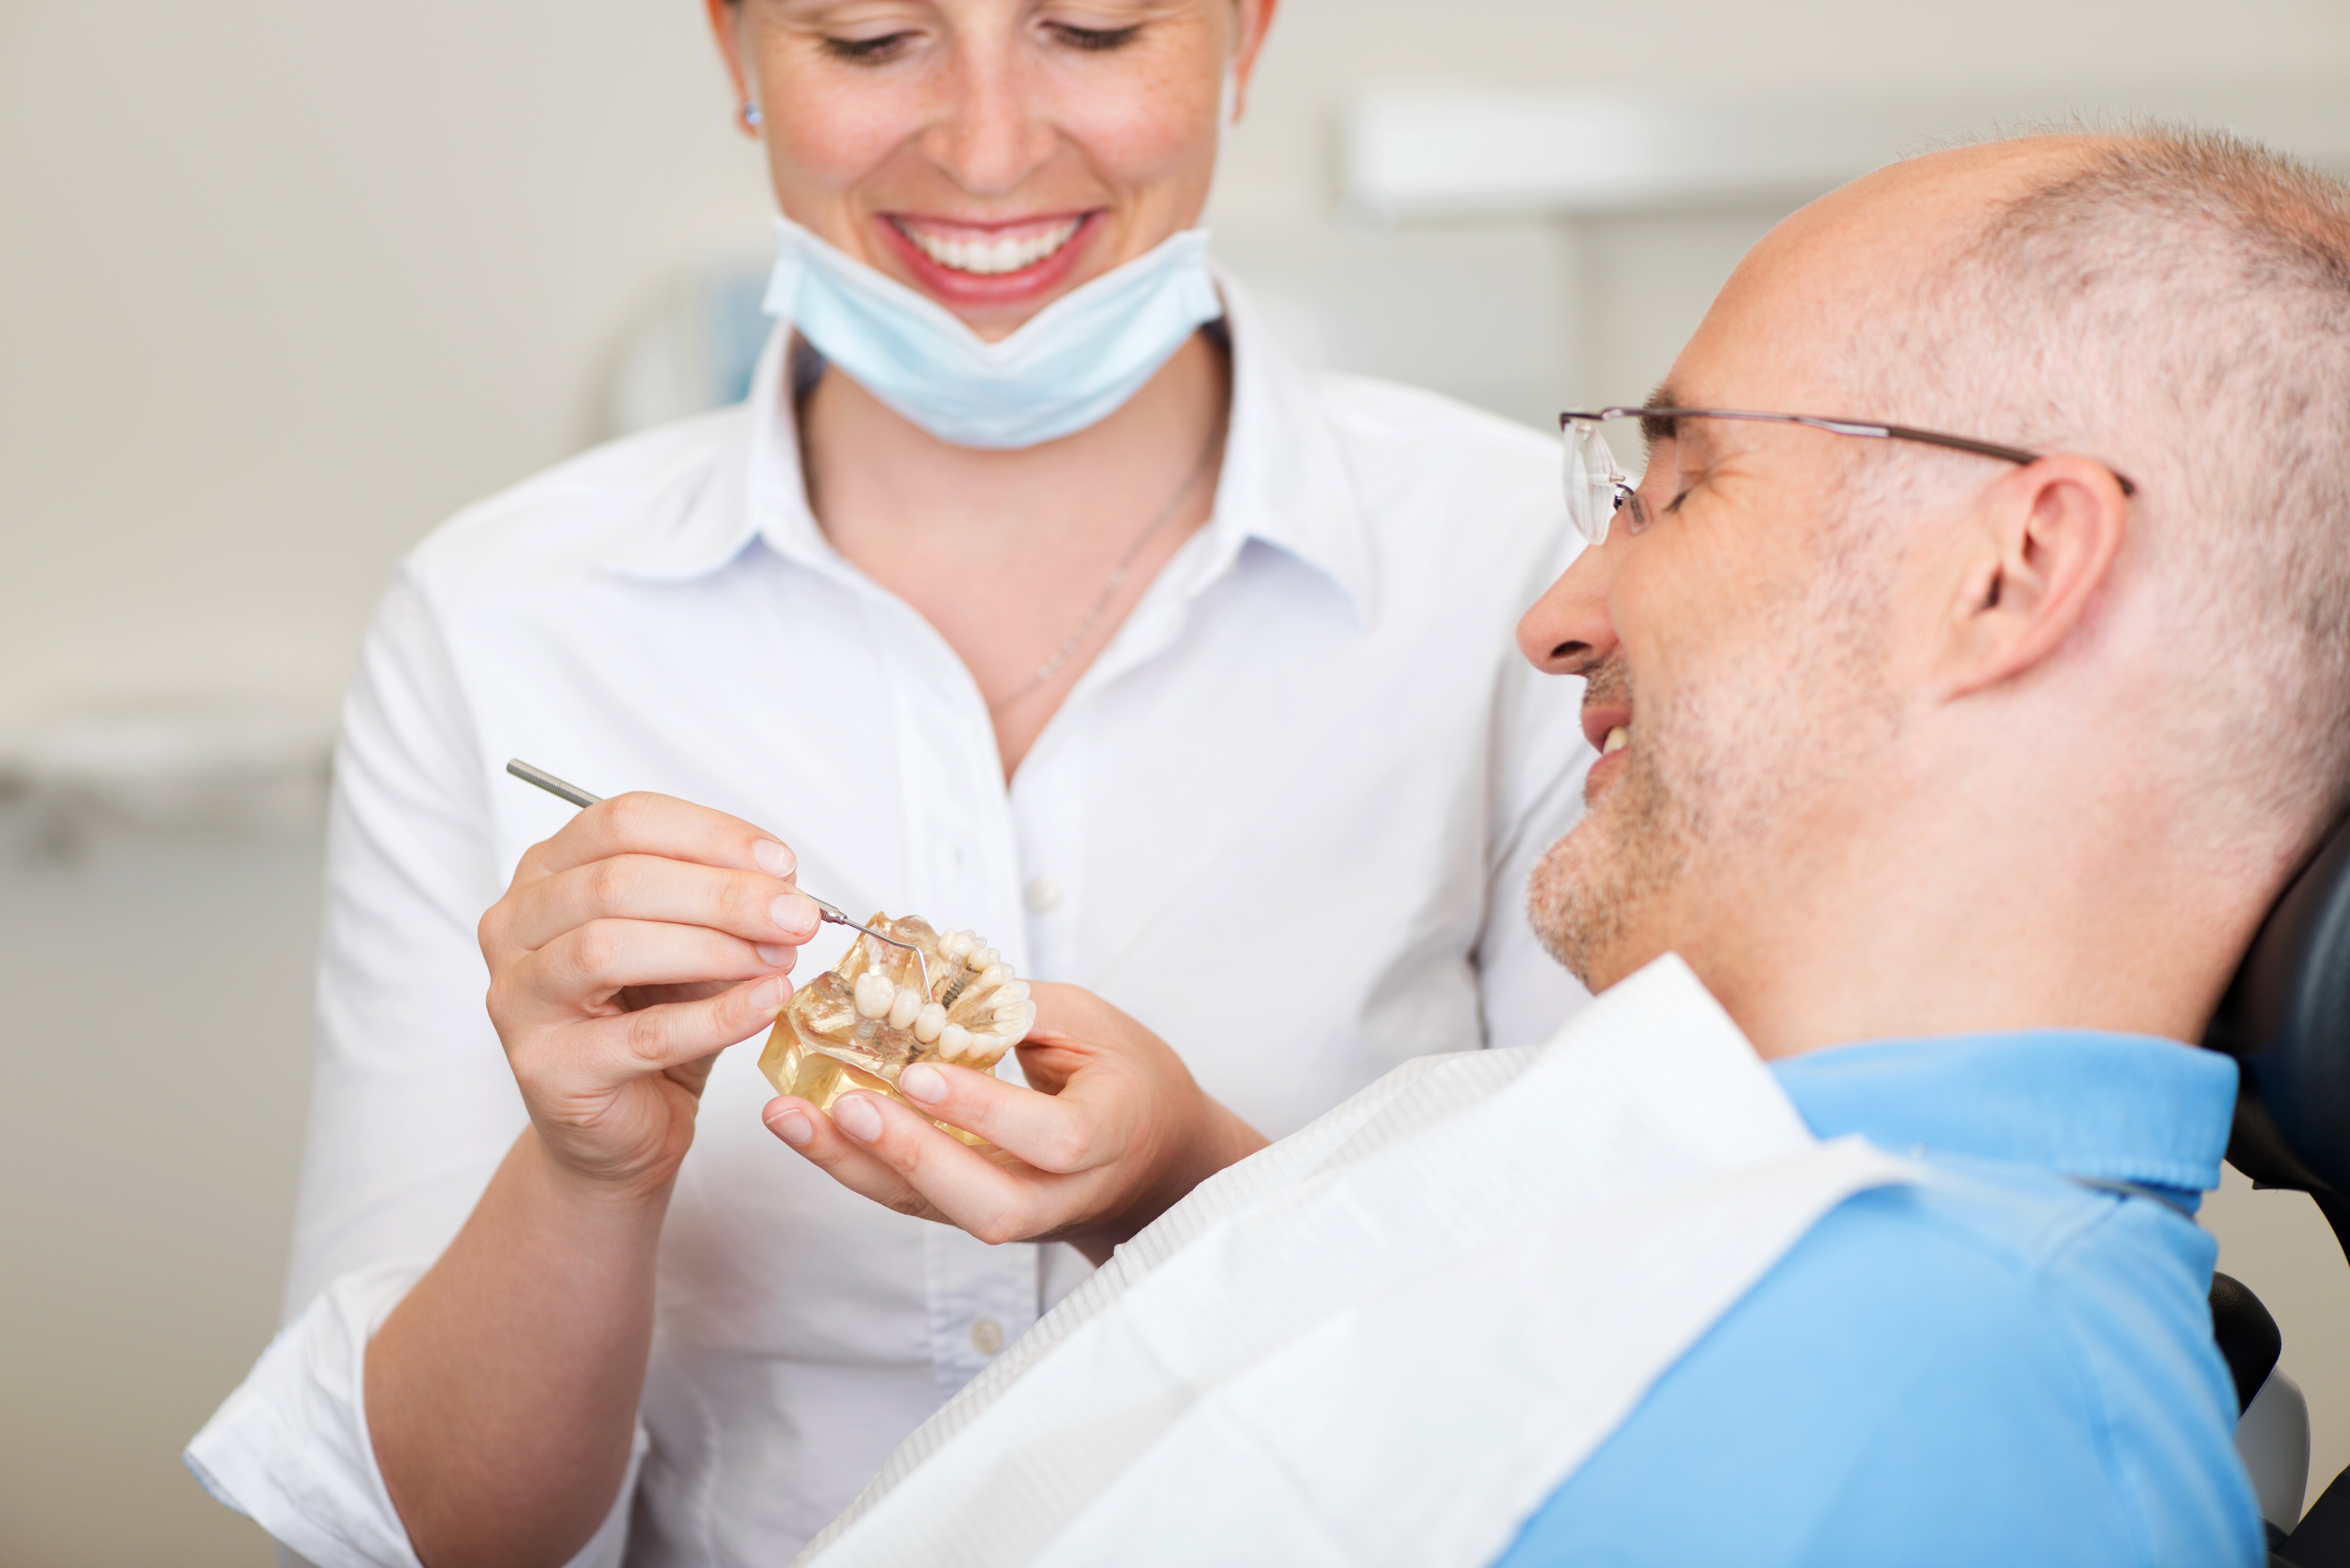 Dentist tinkering with a dental mould in front of a patient